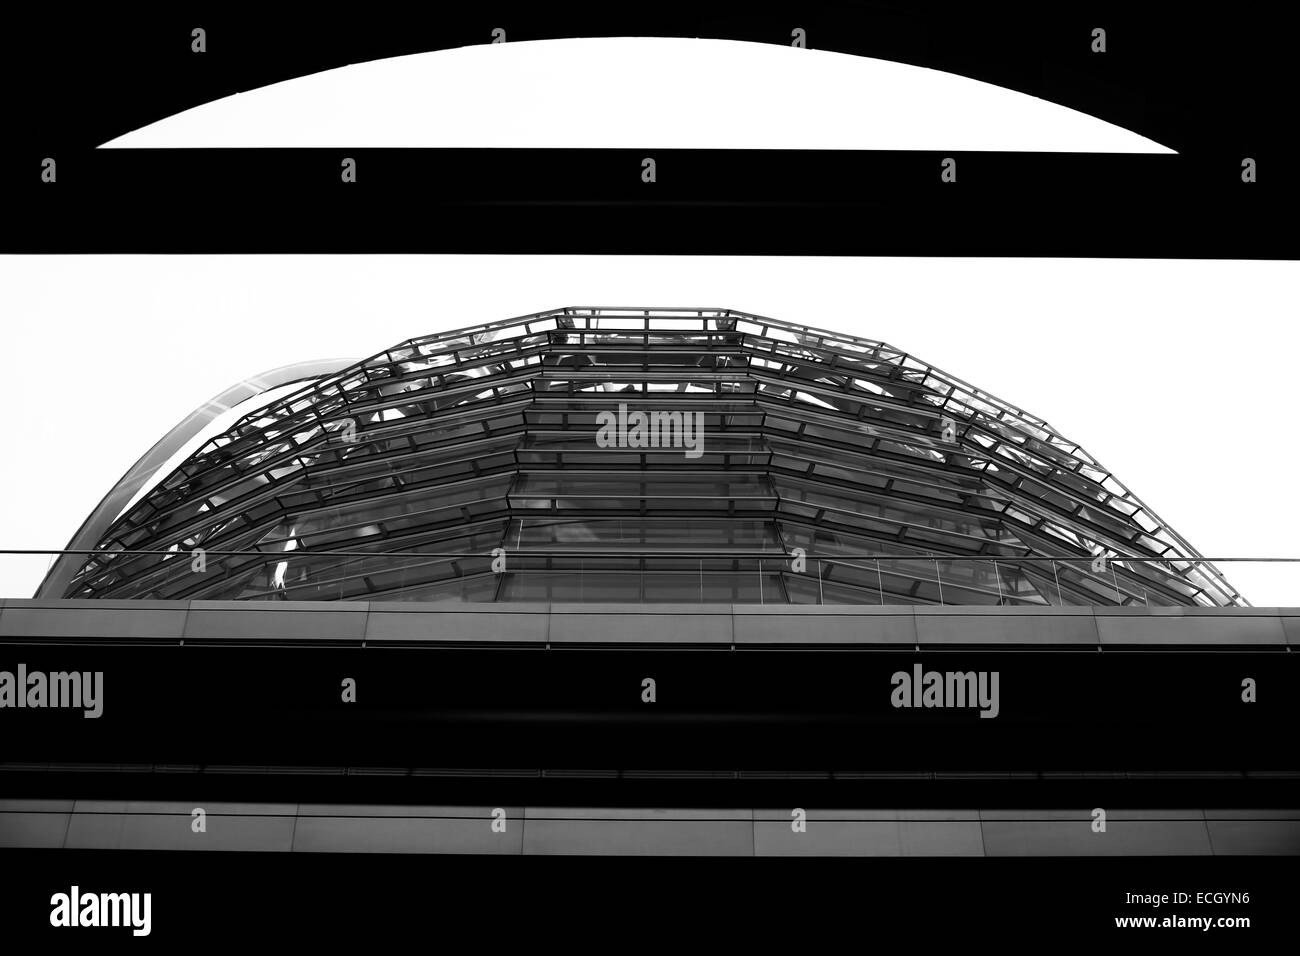 black white berlin reichstag building dome german parliament Stock Photo